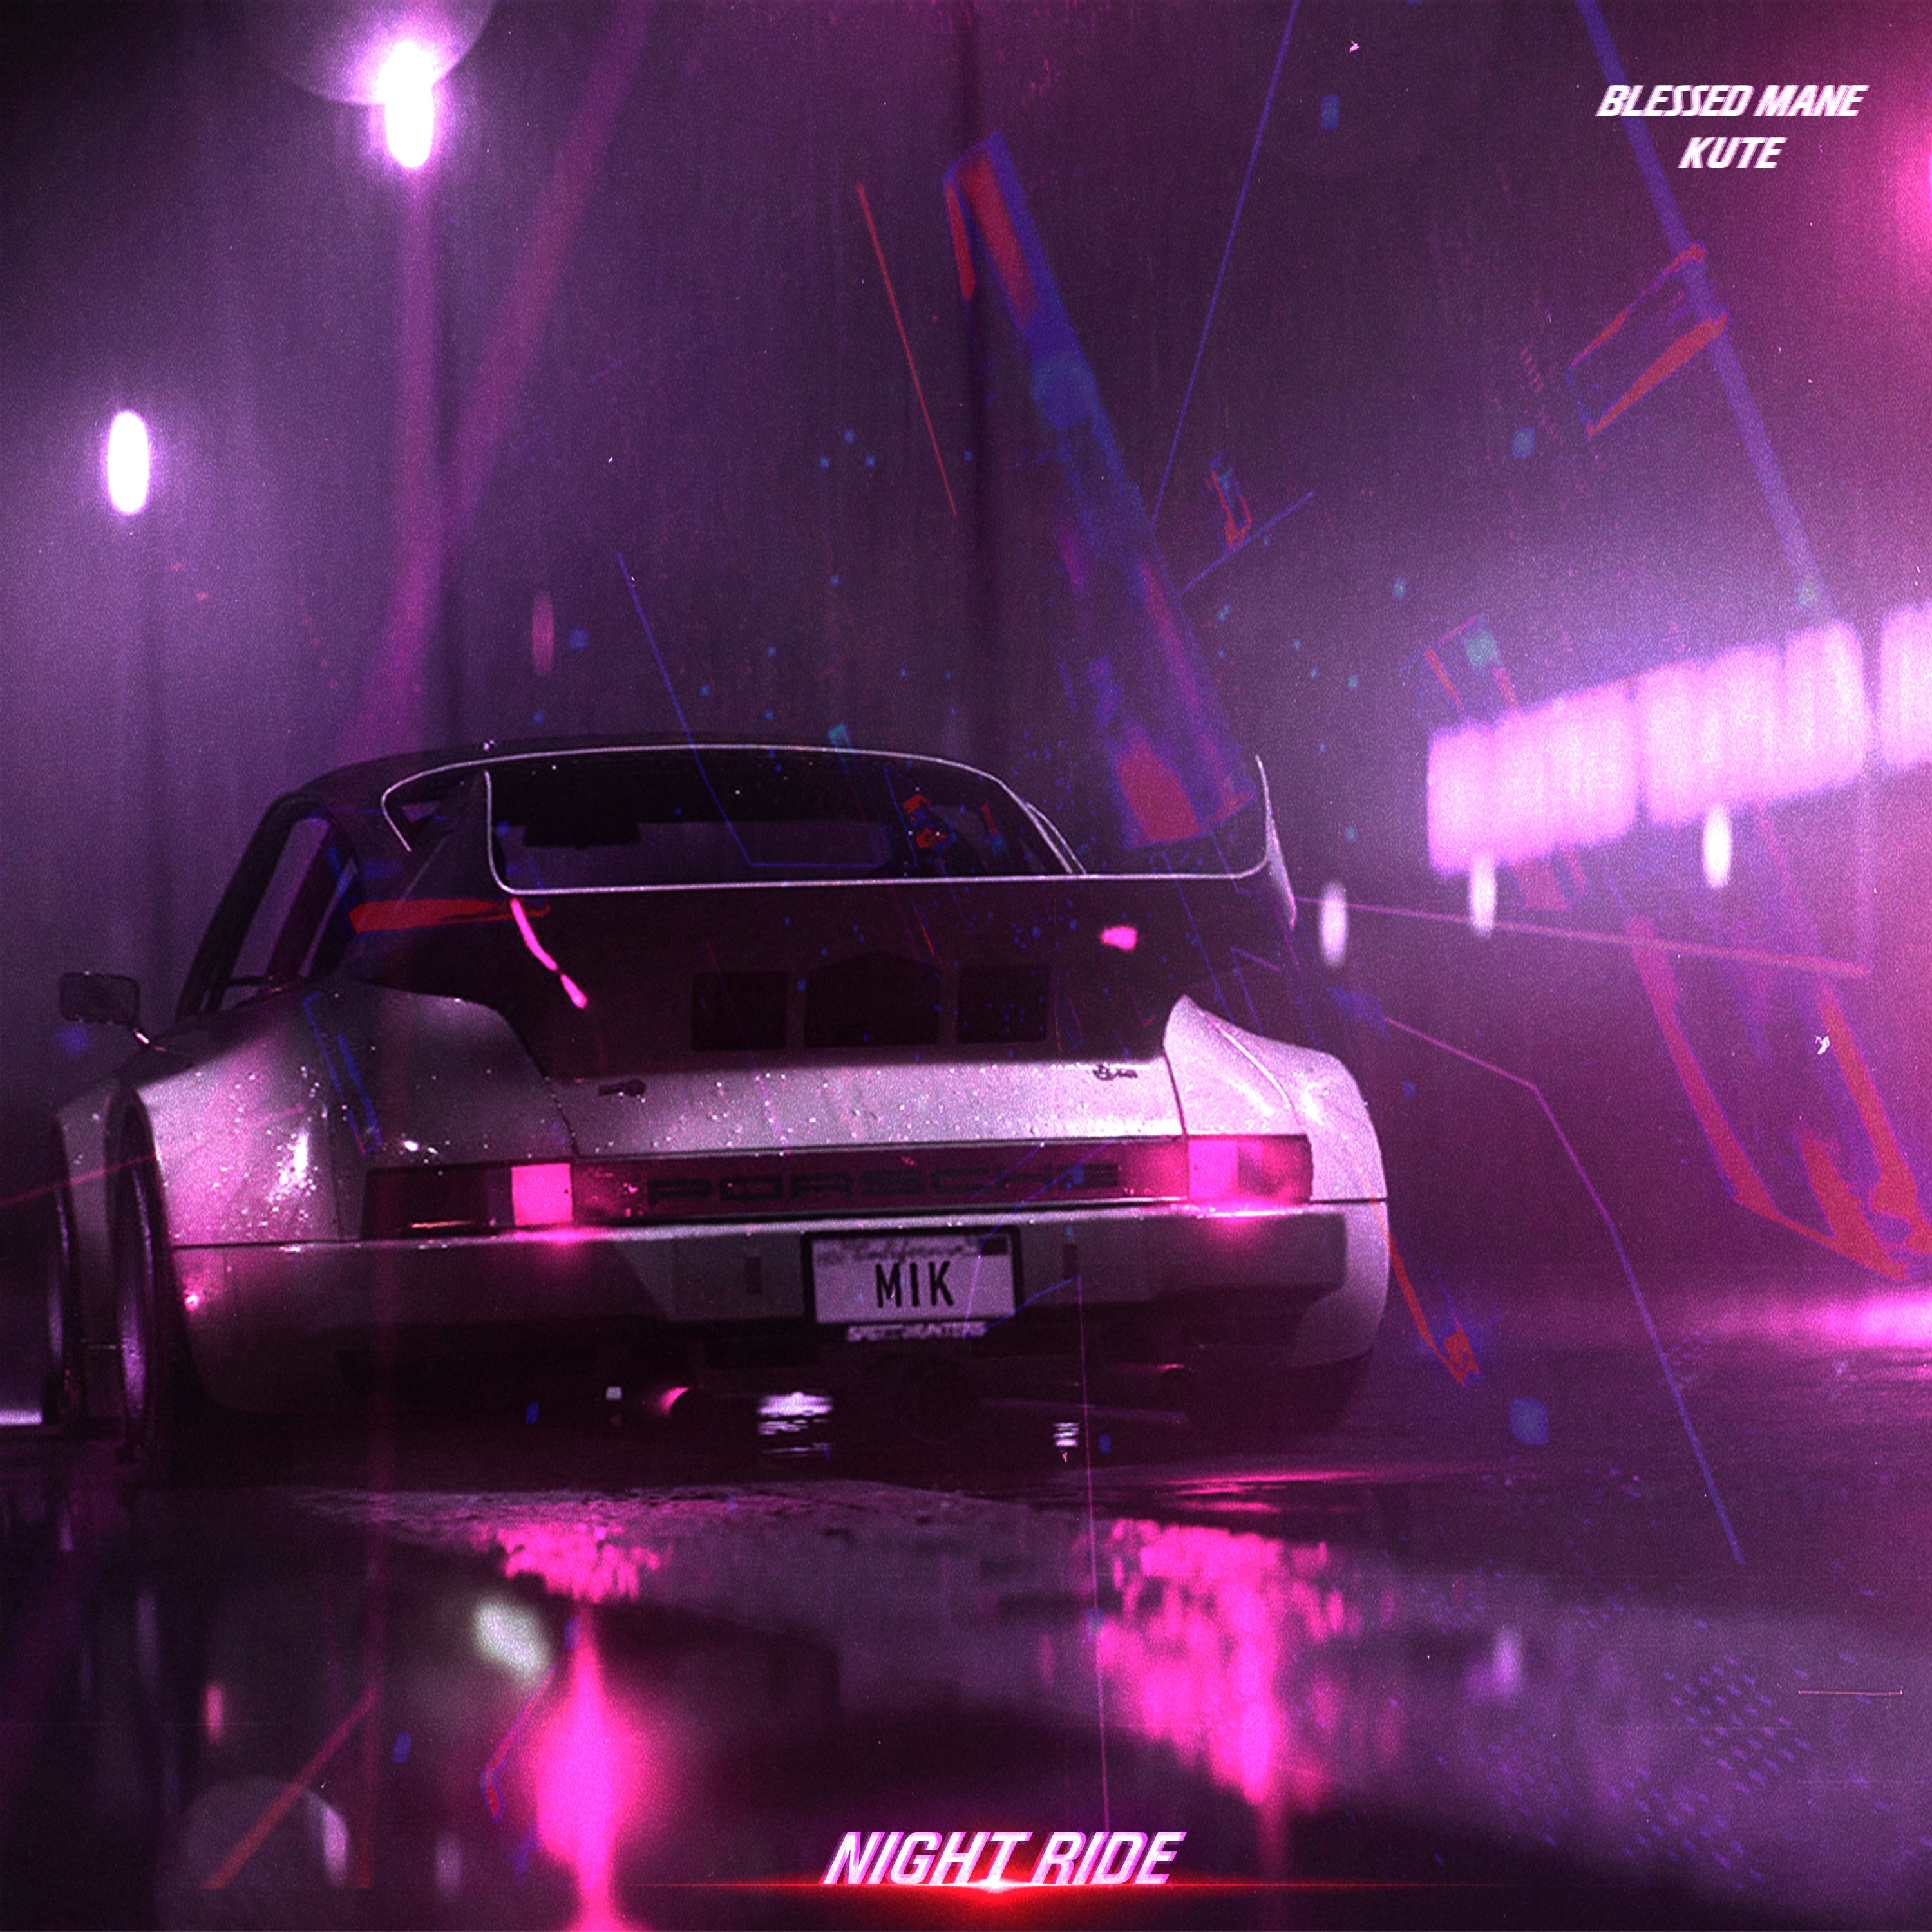 I-download Night Ride feat. BLESSED MANE